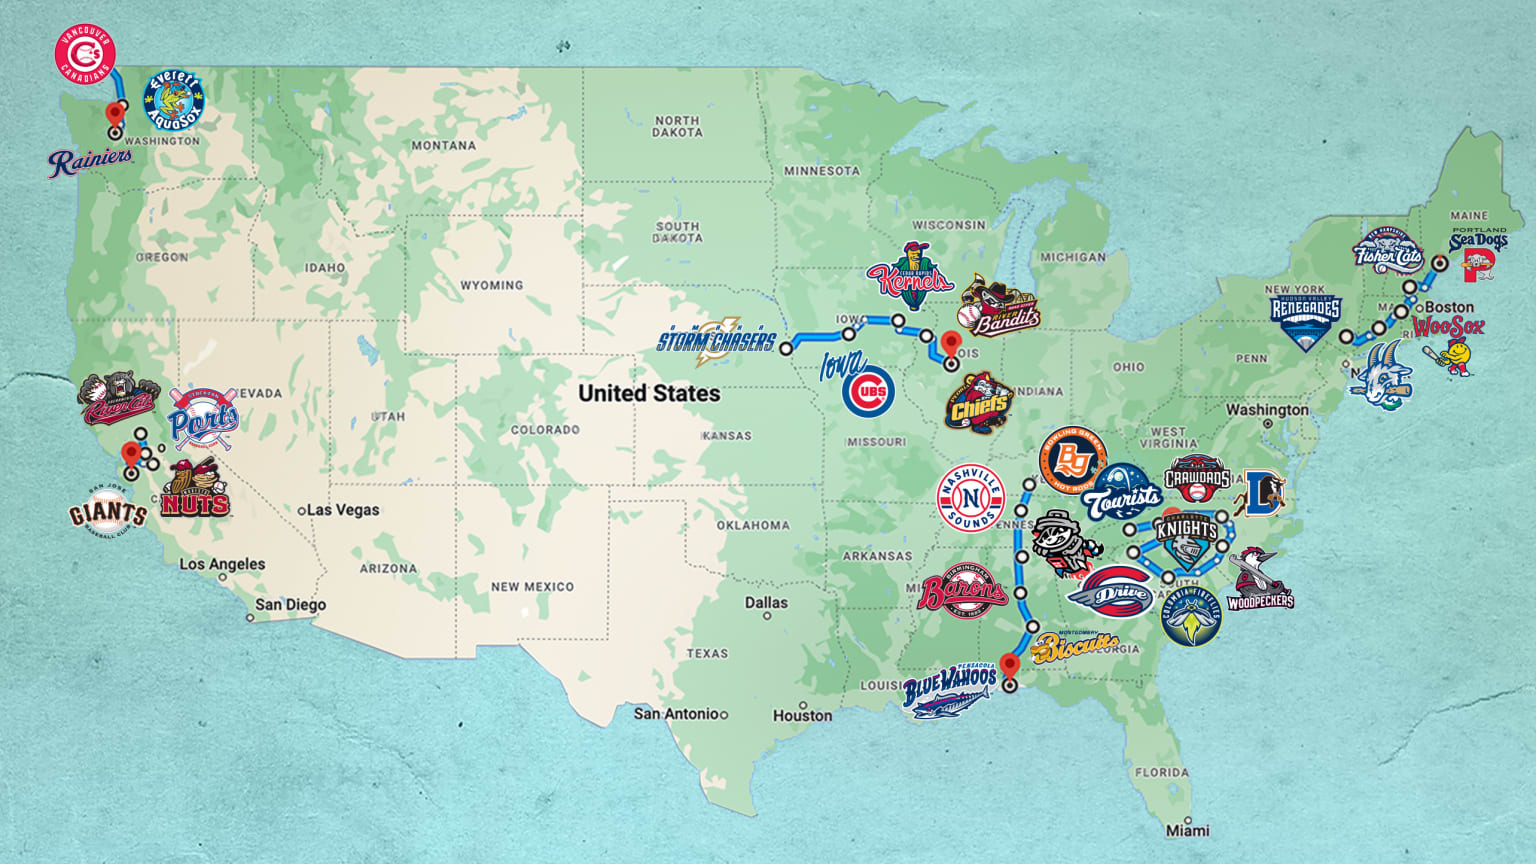 A map of the United States with team logos scattered across it